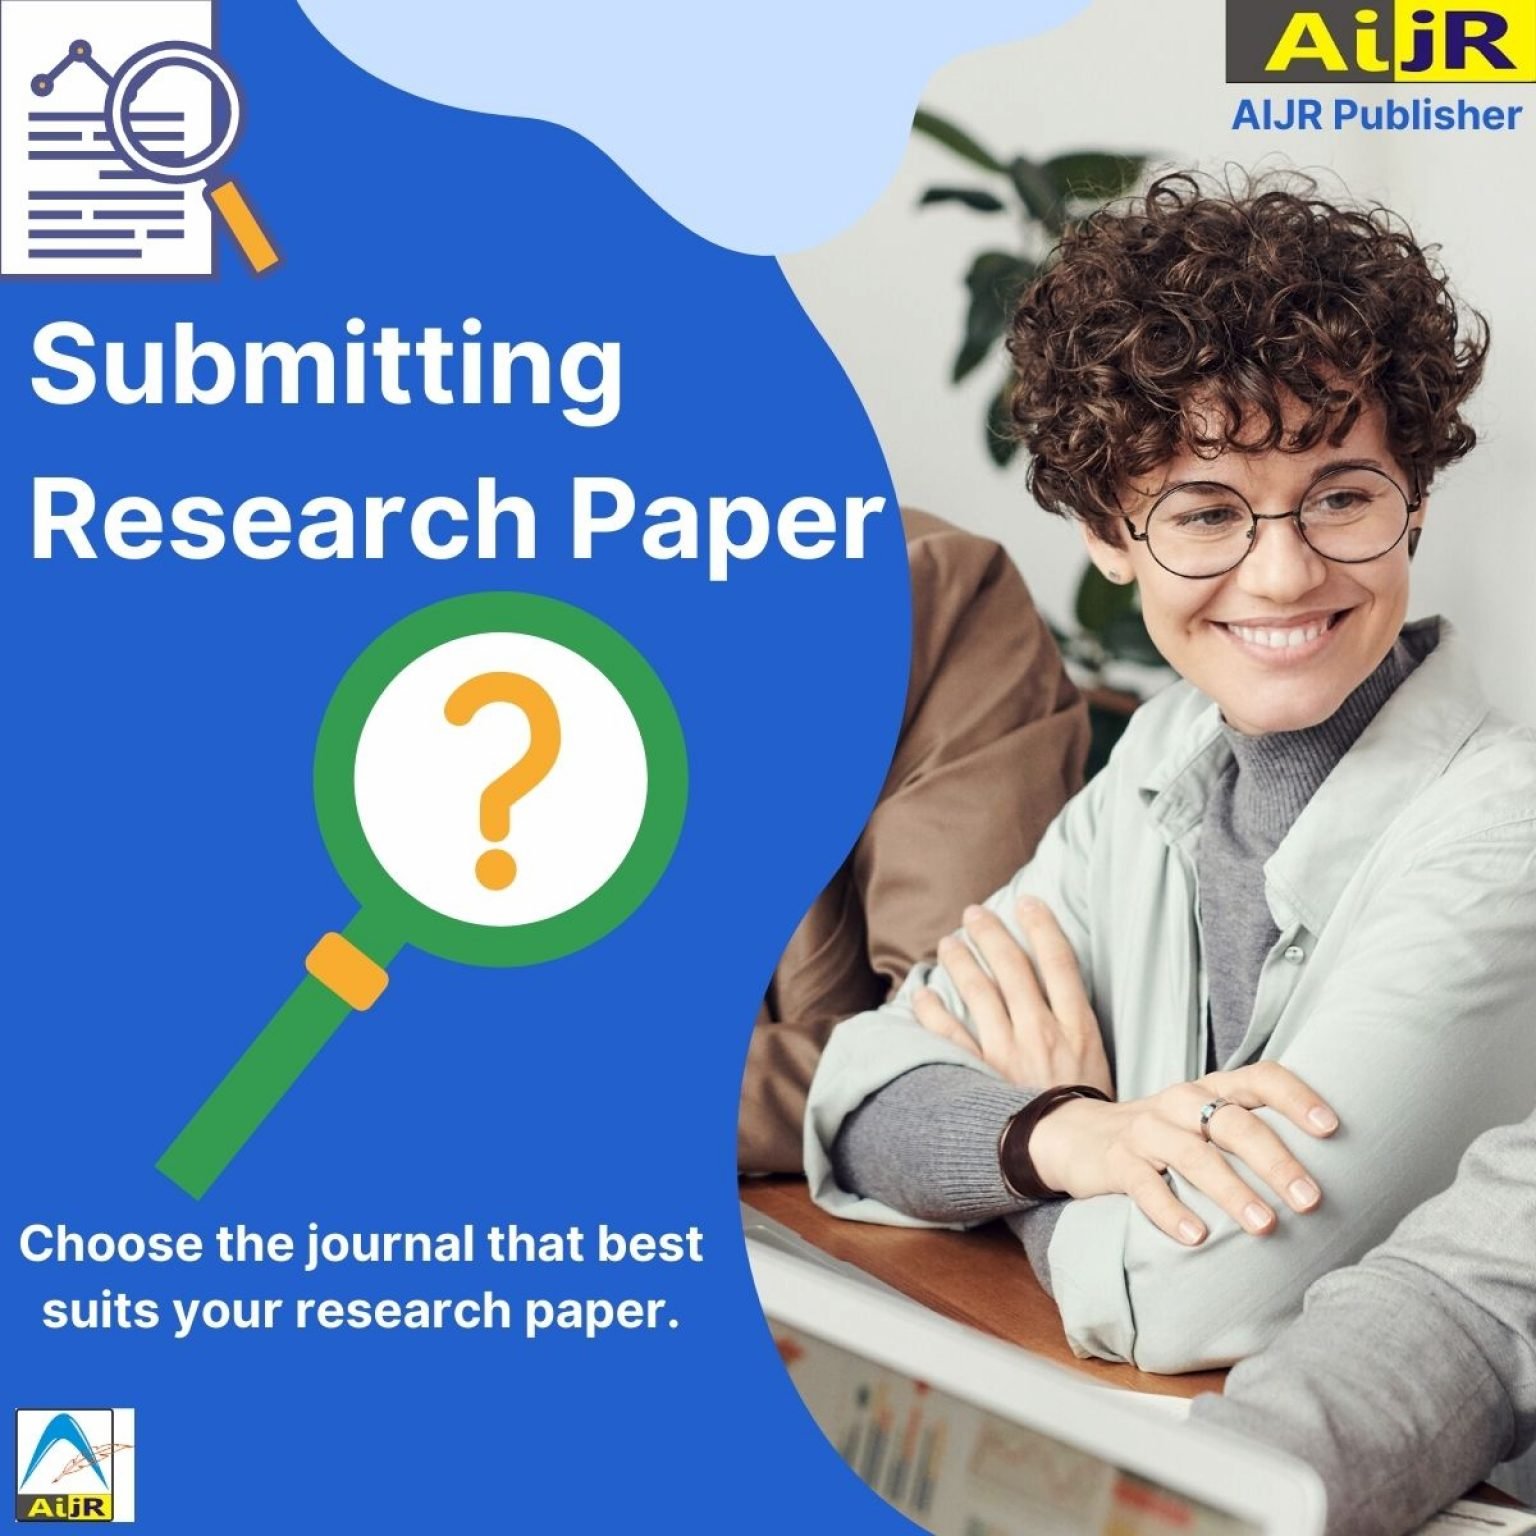 how to submit research paper online